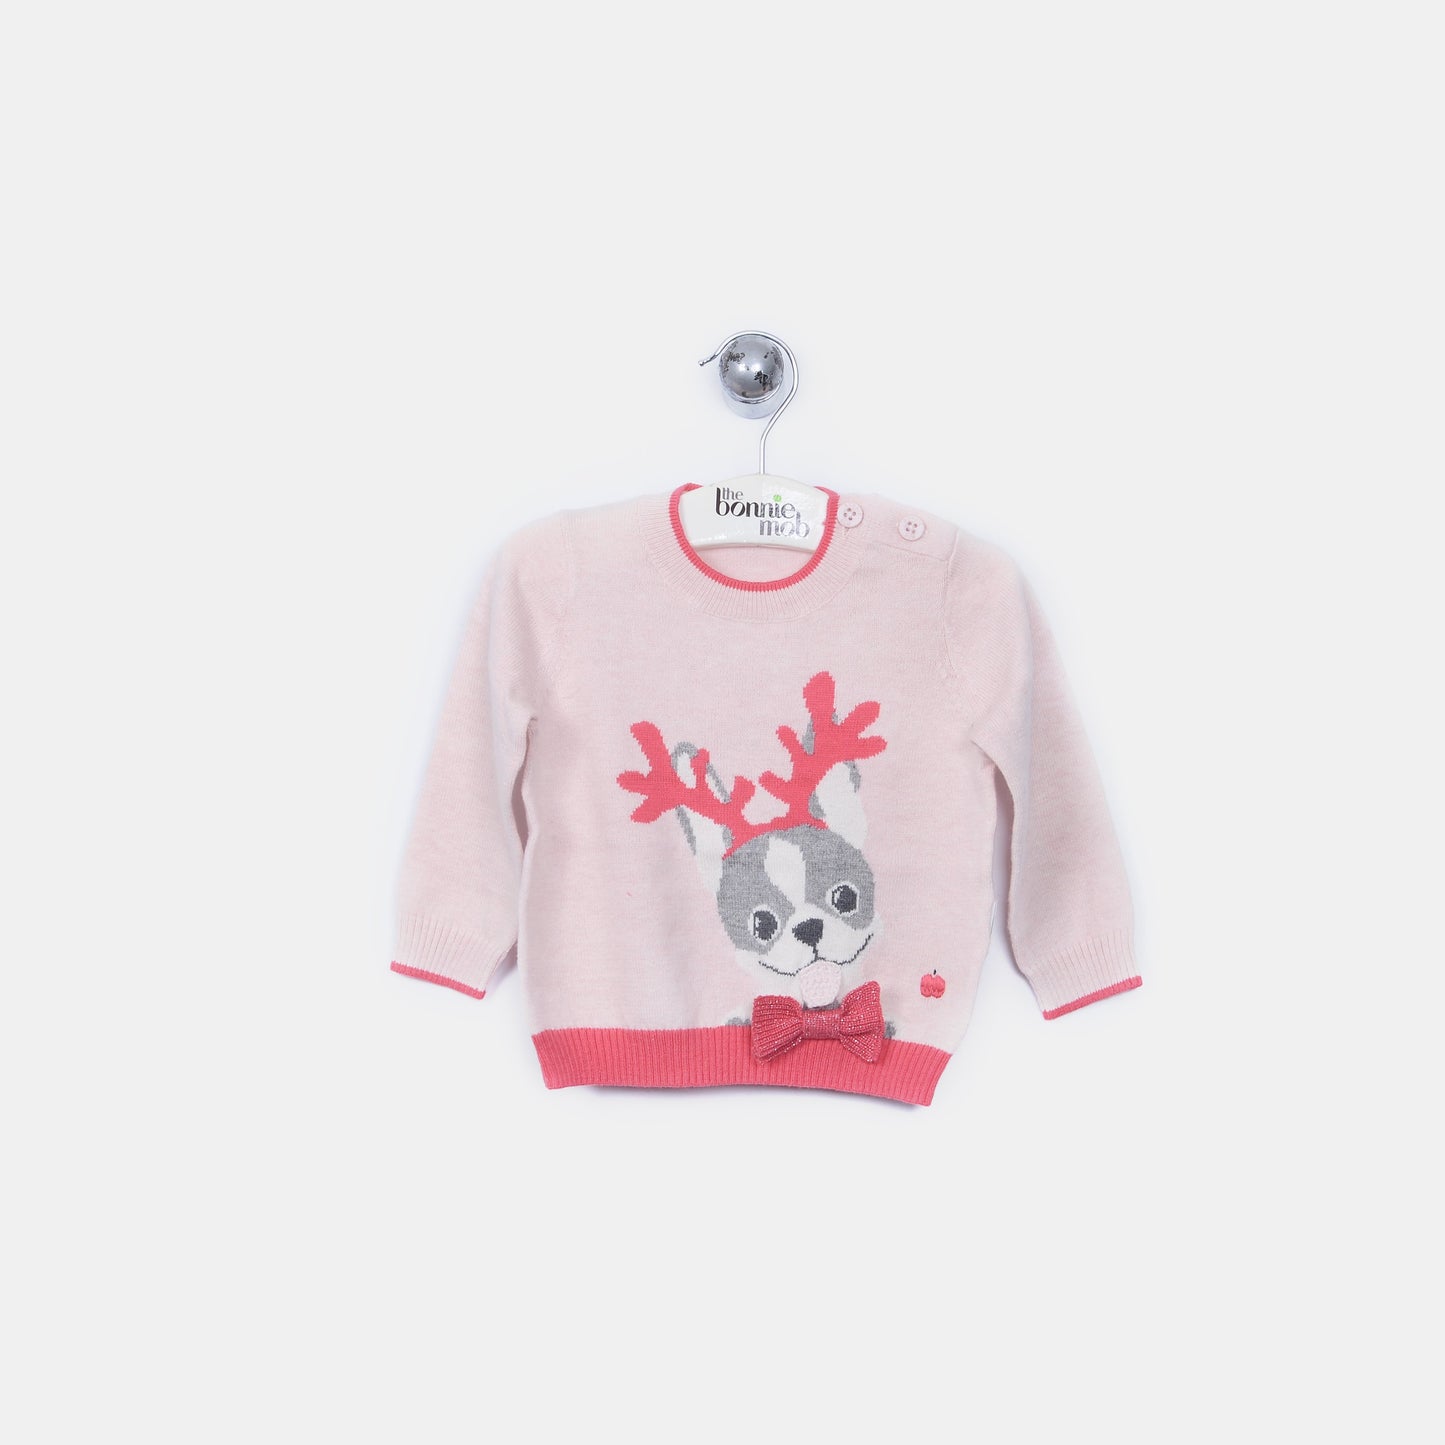 SWEATER - BABY - 2 COLOR (CLOUD JADE/PINK CALICO) - L-REMI